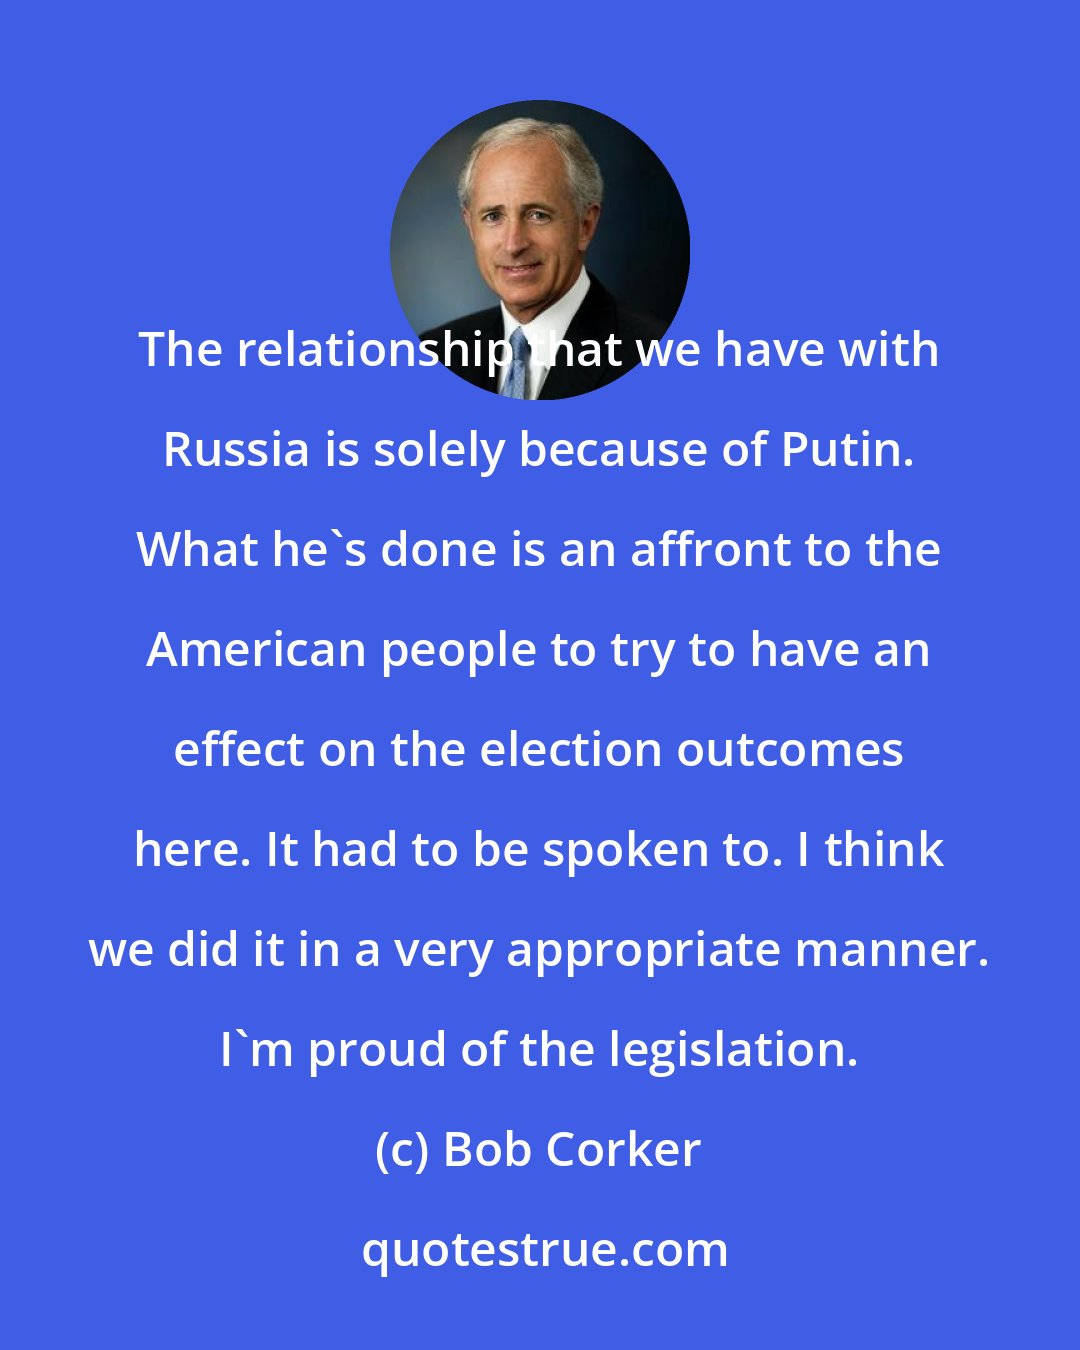 Bob Corker: The relationship that we have with Russia is solely because of Putin. What he's done is an affront to the American people to try to have an effect on the election outcomes here. It had to be spoken to. I think we did it in a very appropriate manner. I'm proud of the legislation.